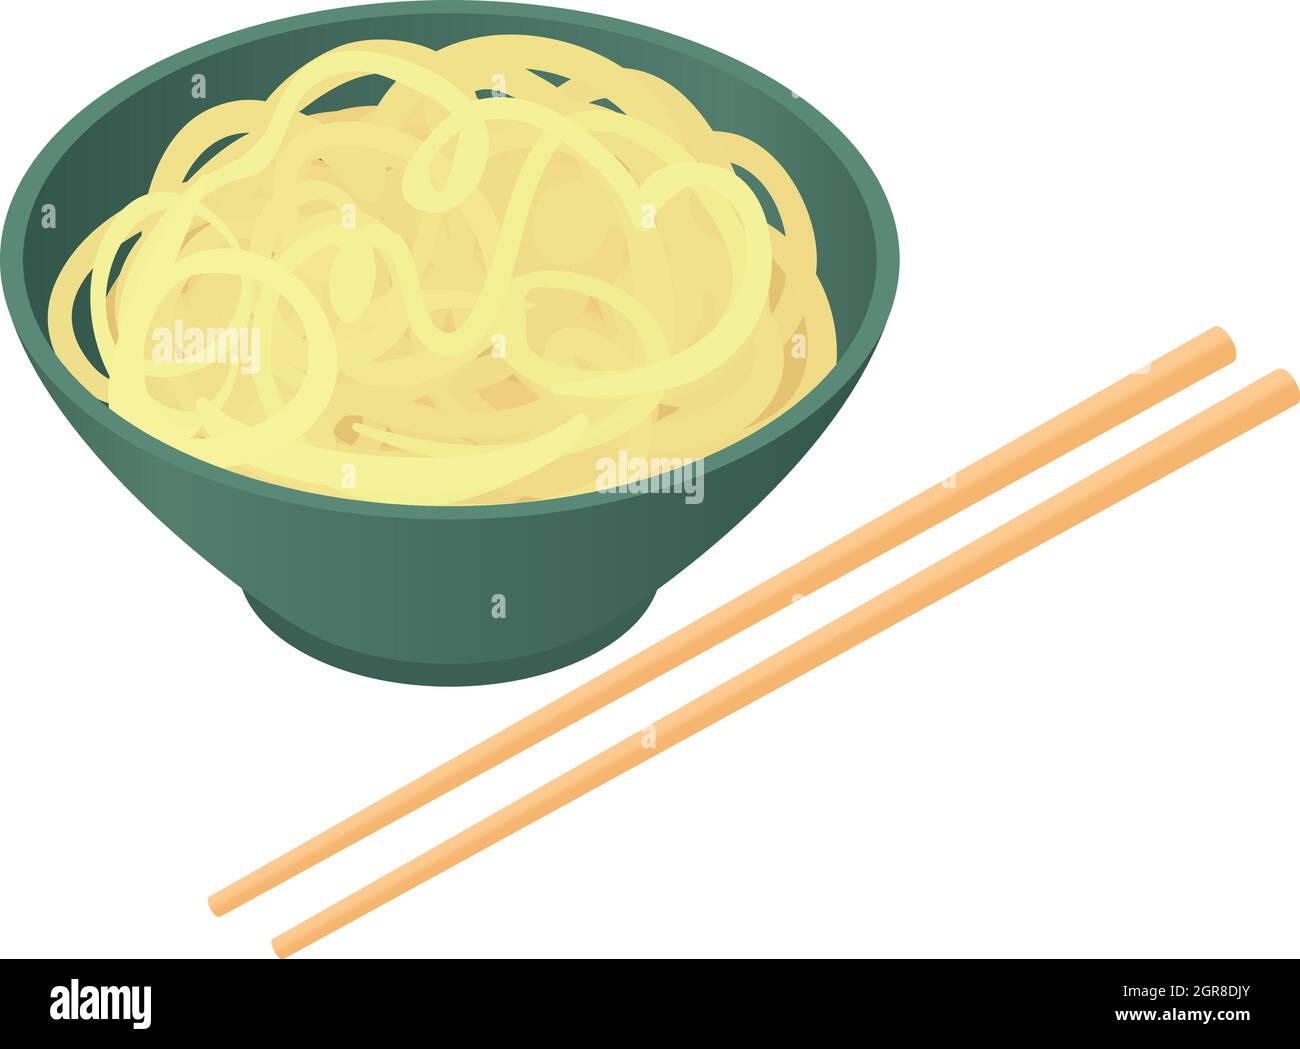 Noodles with chopsticks icon, cartoon style Stock Vector